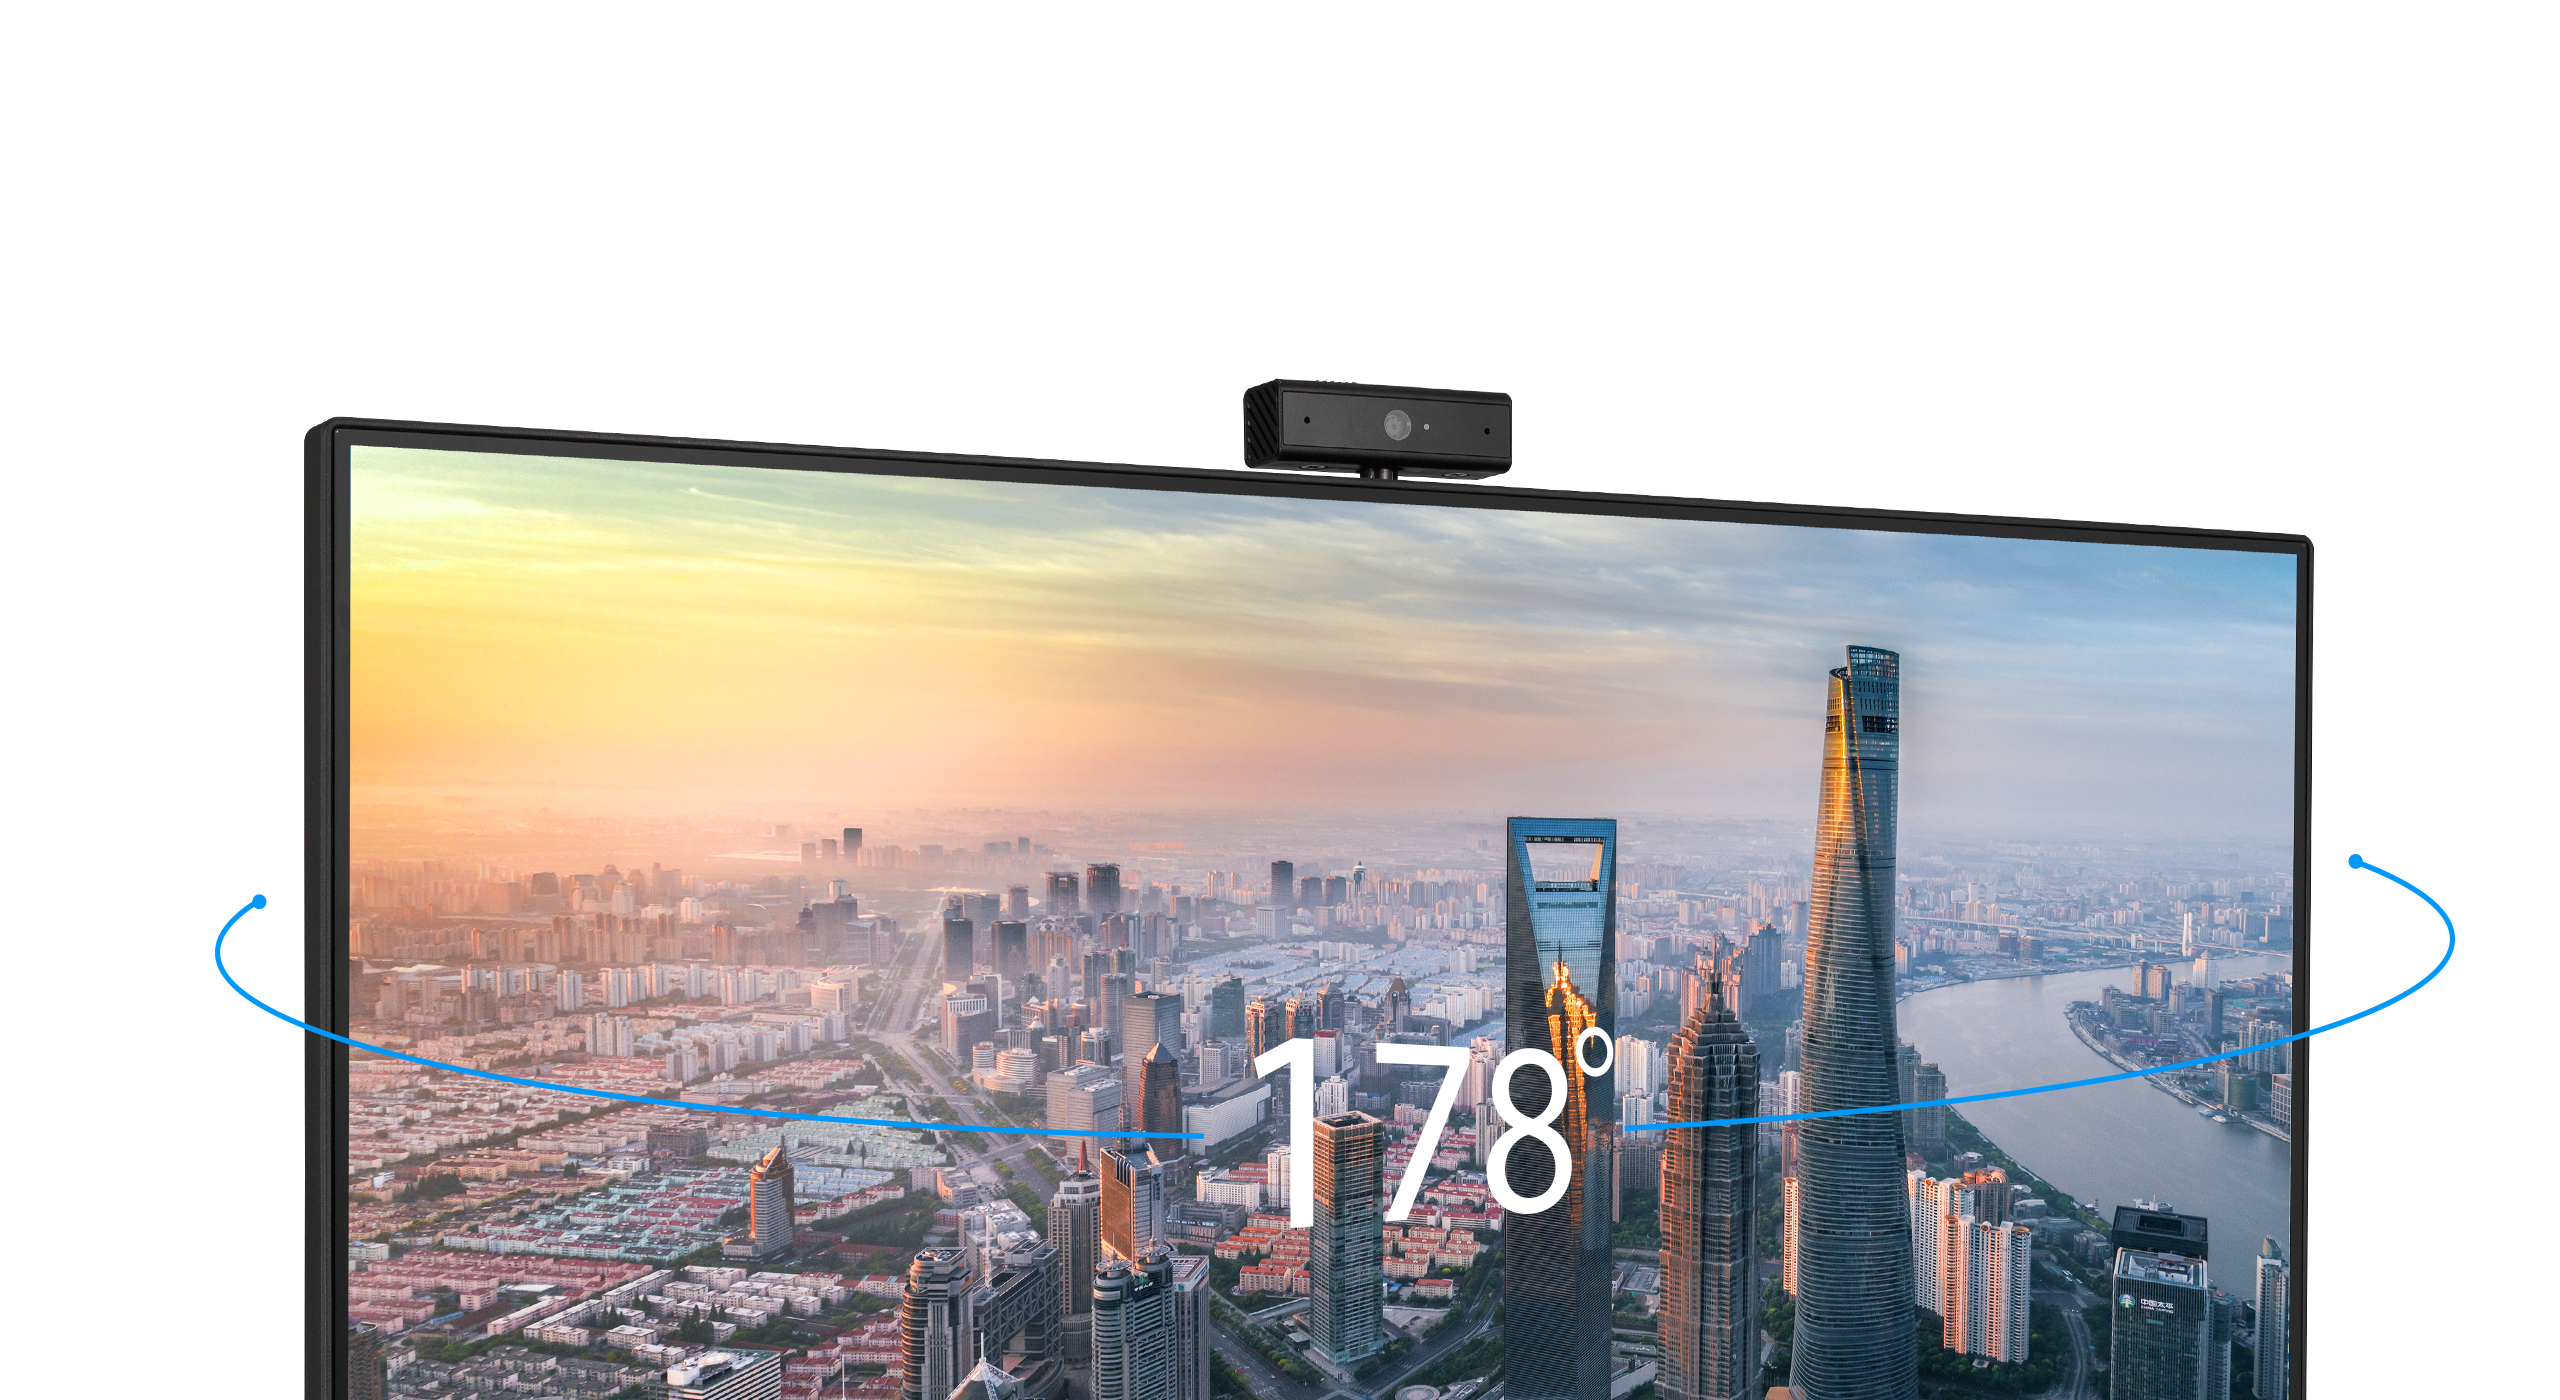 BE24EQK offers Full HD resolution to deliver stunning clarity.